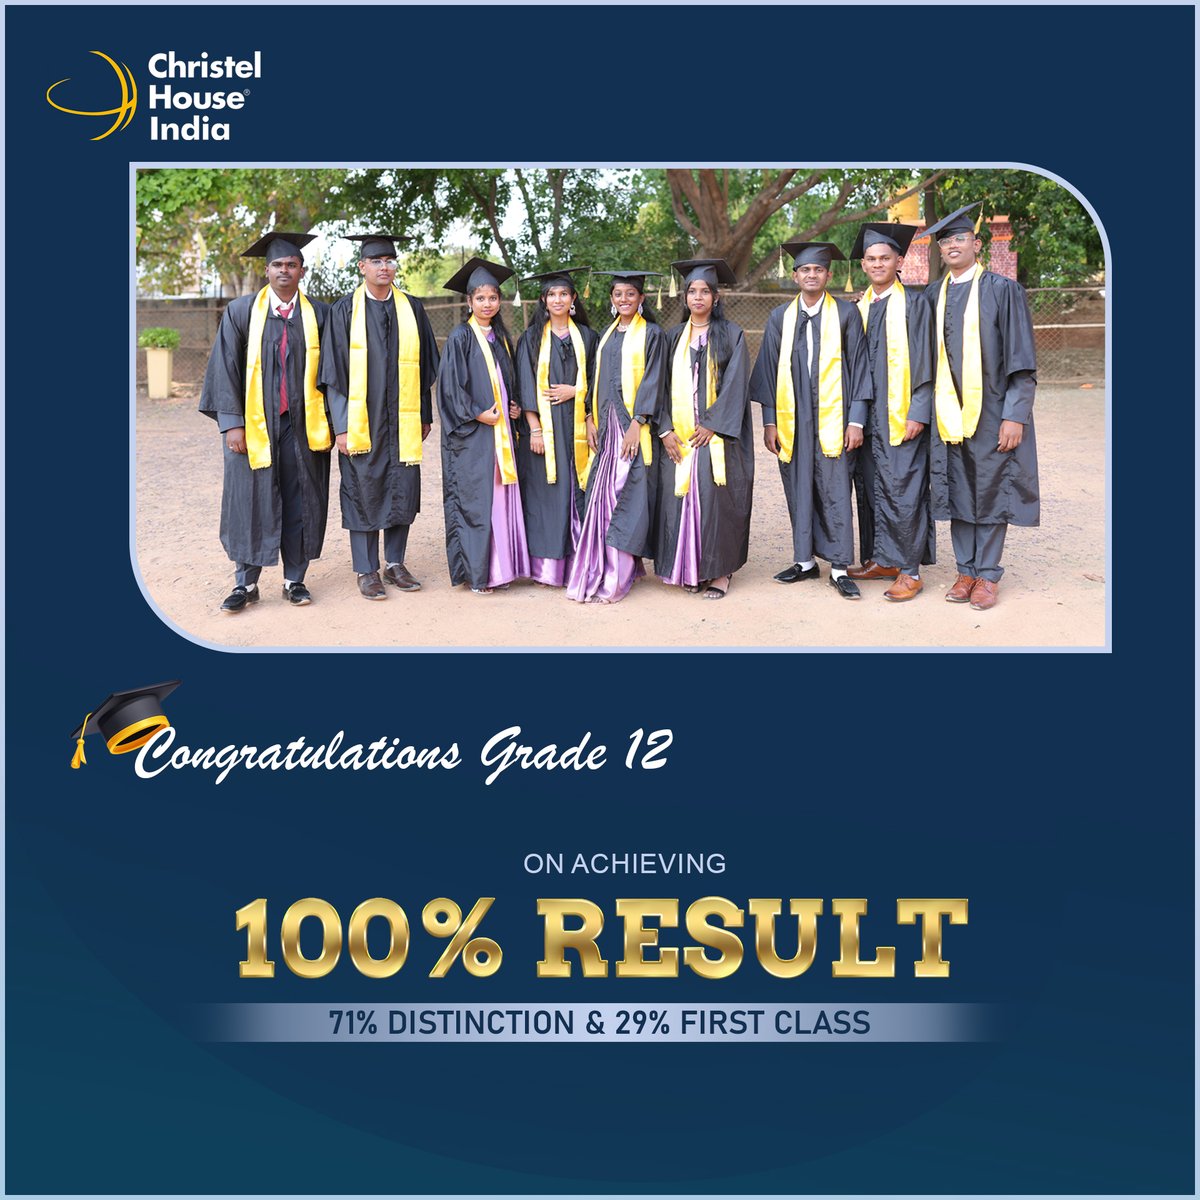 Congratulations to our Grade 12 students at Christel House India. Impressive results. We are so proud of your hard work and wish you success as you continue your journey. You will always be part of our Christel House family. #morethanaschool #changinglifeoutcomes